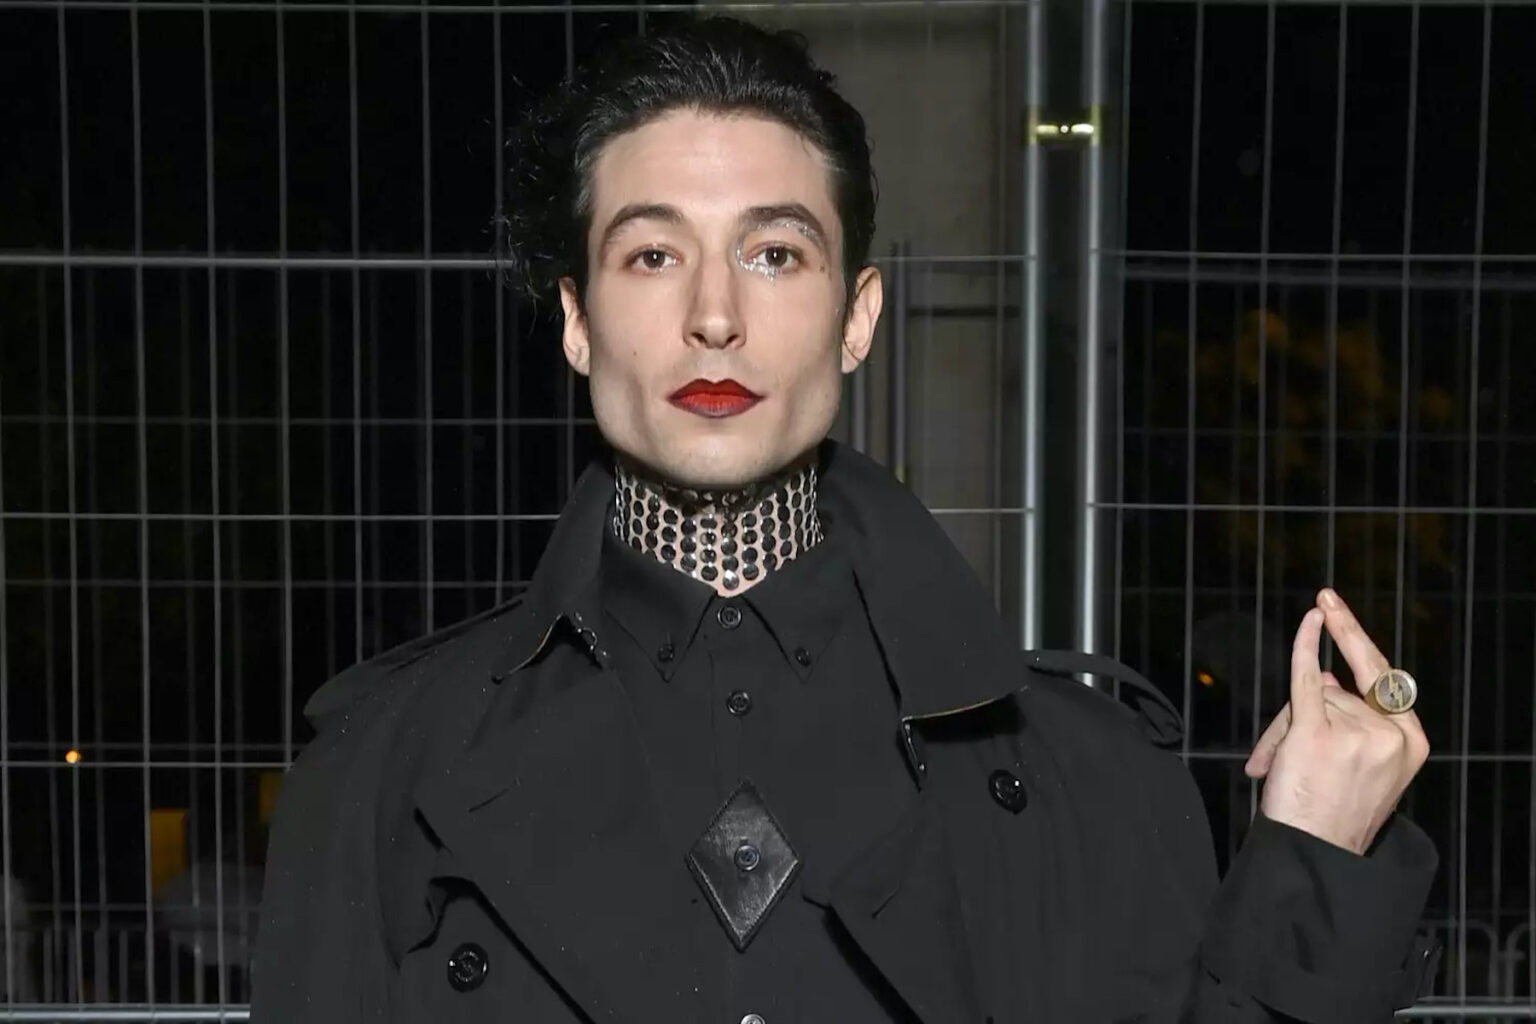 Actor Ezra Miller is once again being accused of abusive behavior. Now, the court can't serve legal papers since Miller's location has yet to be found.